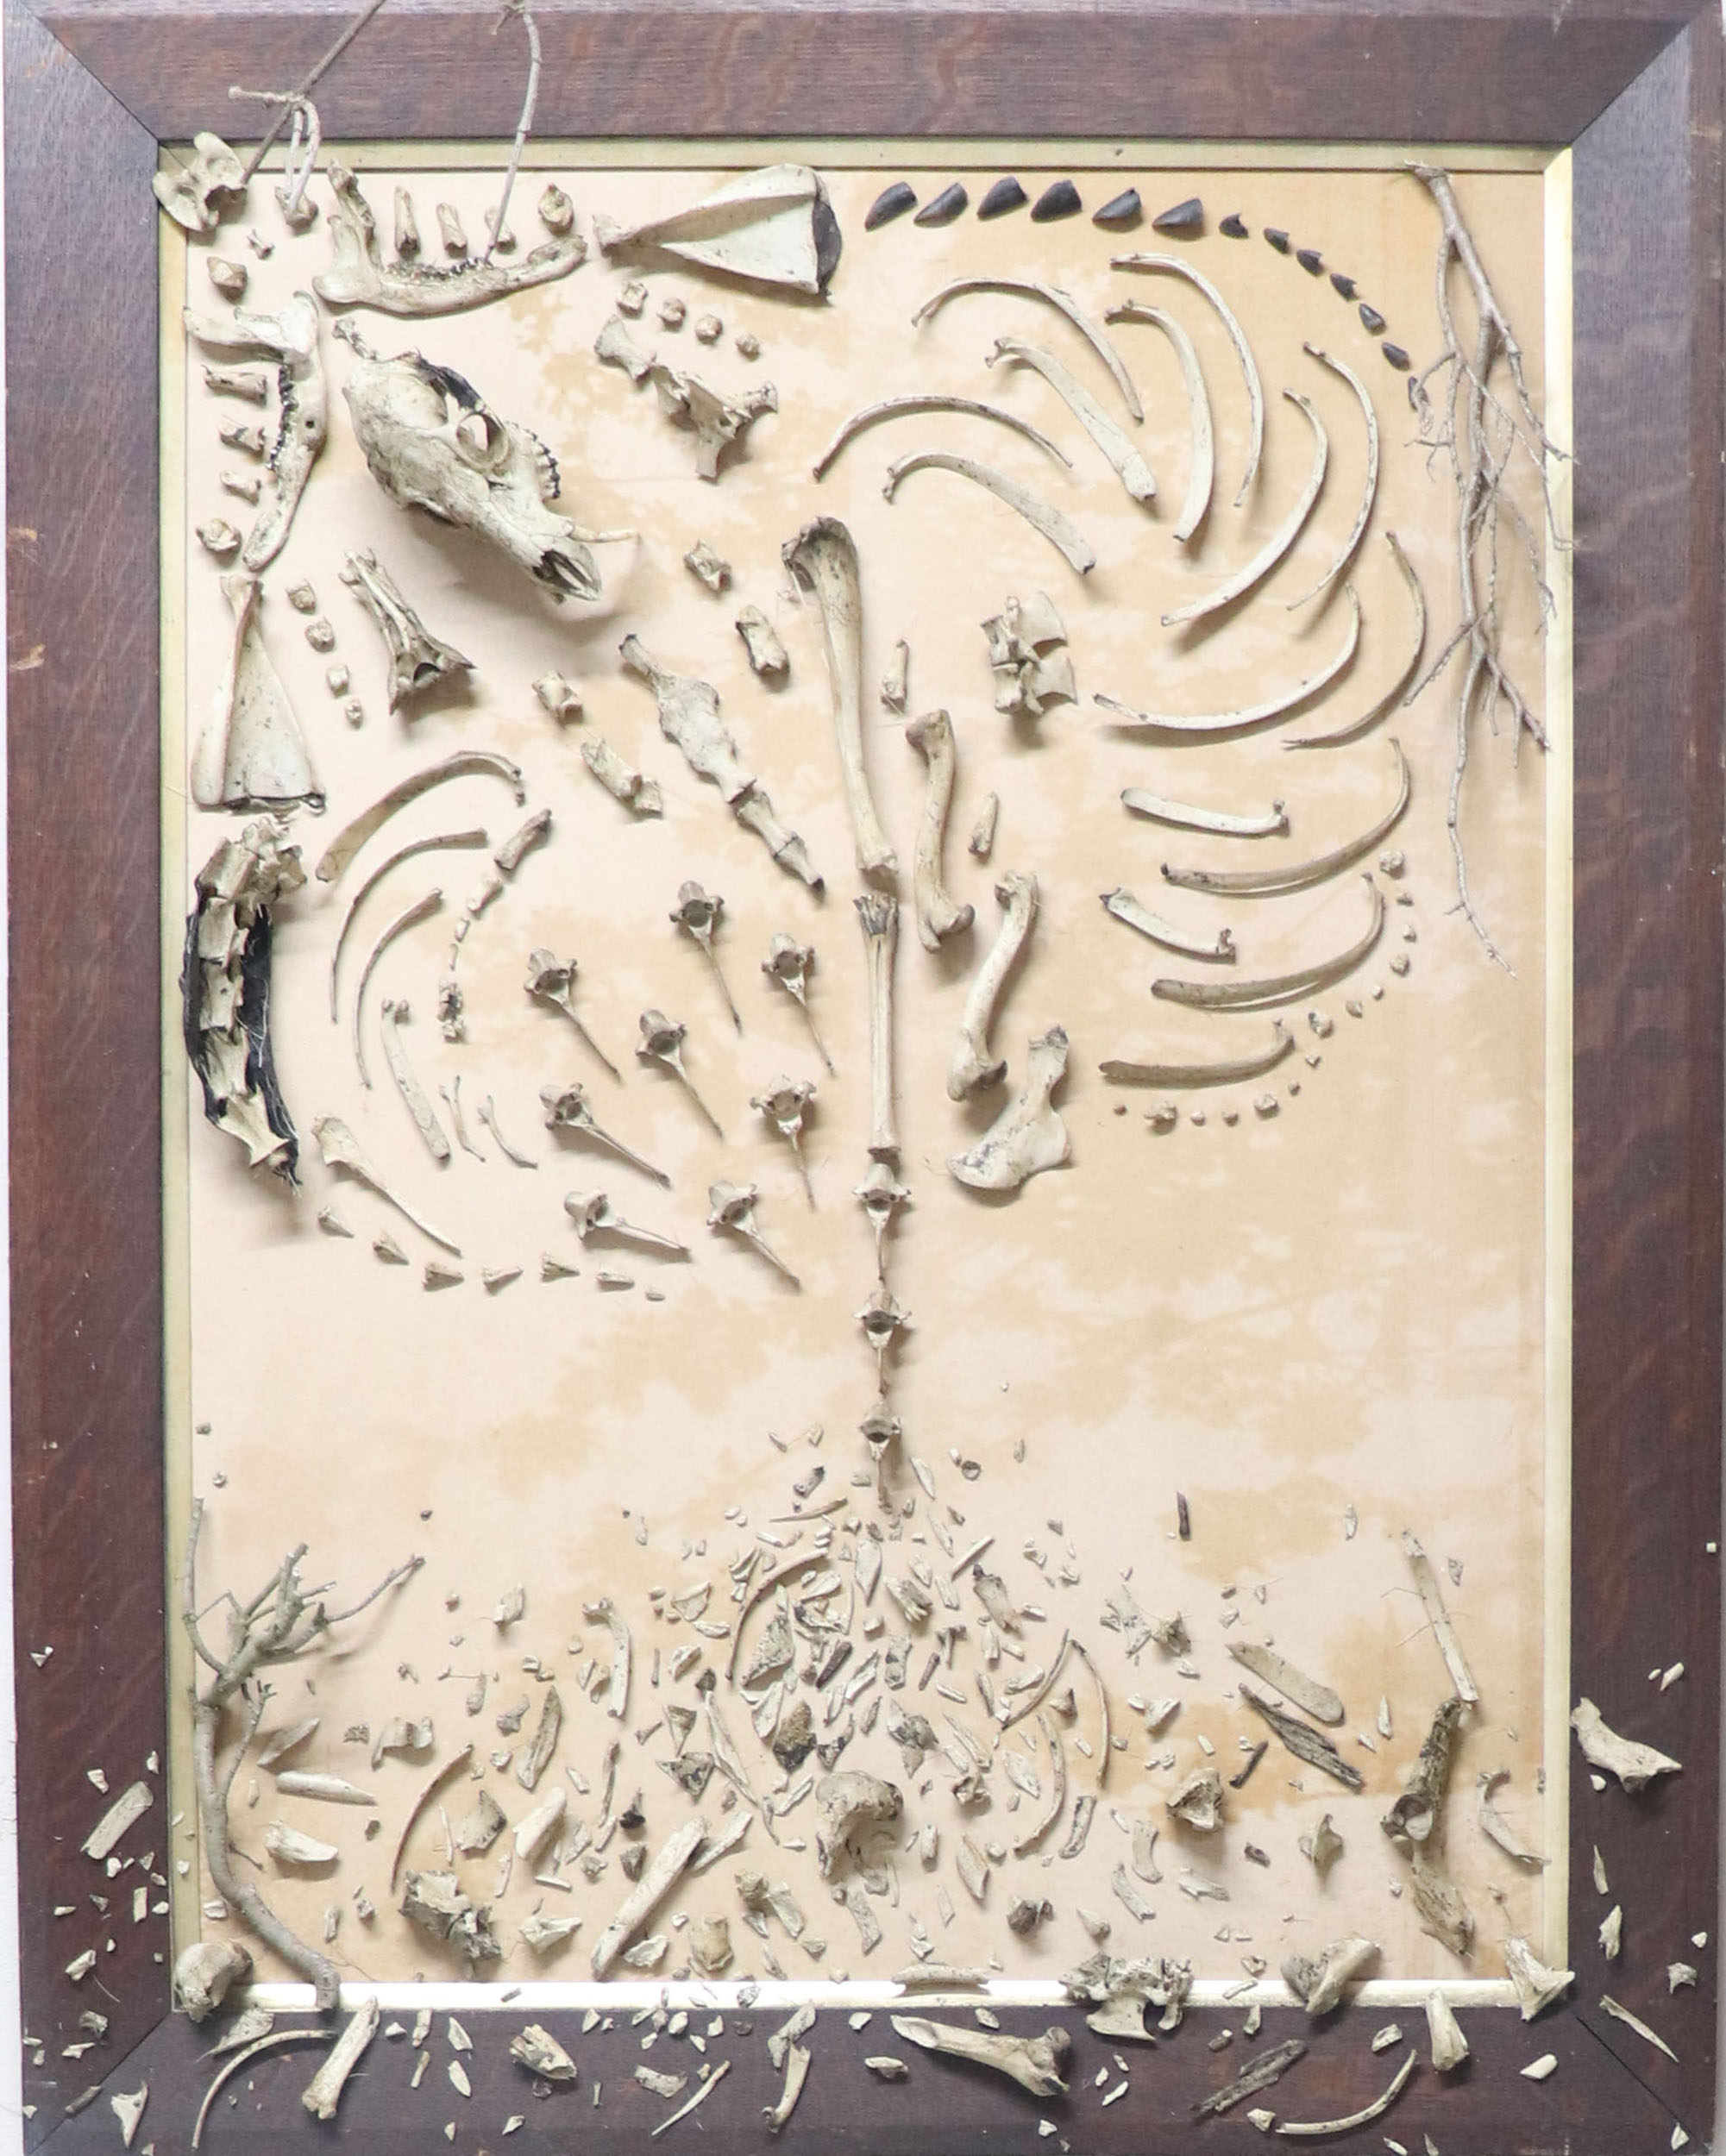 Wall hanging artwork by Zoë Bullen, displaying broken skeletal remains, of a small roadkill deer, arranged over rastered photograph of foliage, and old wooden picture frame.